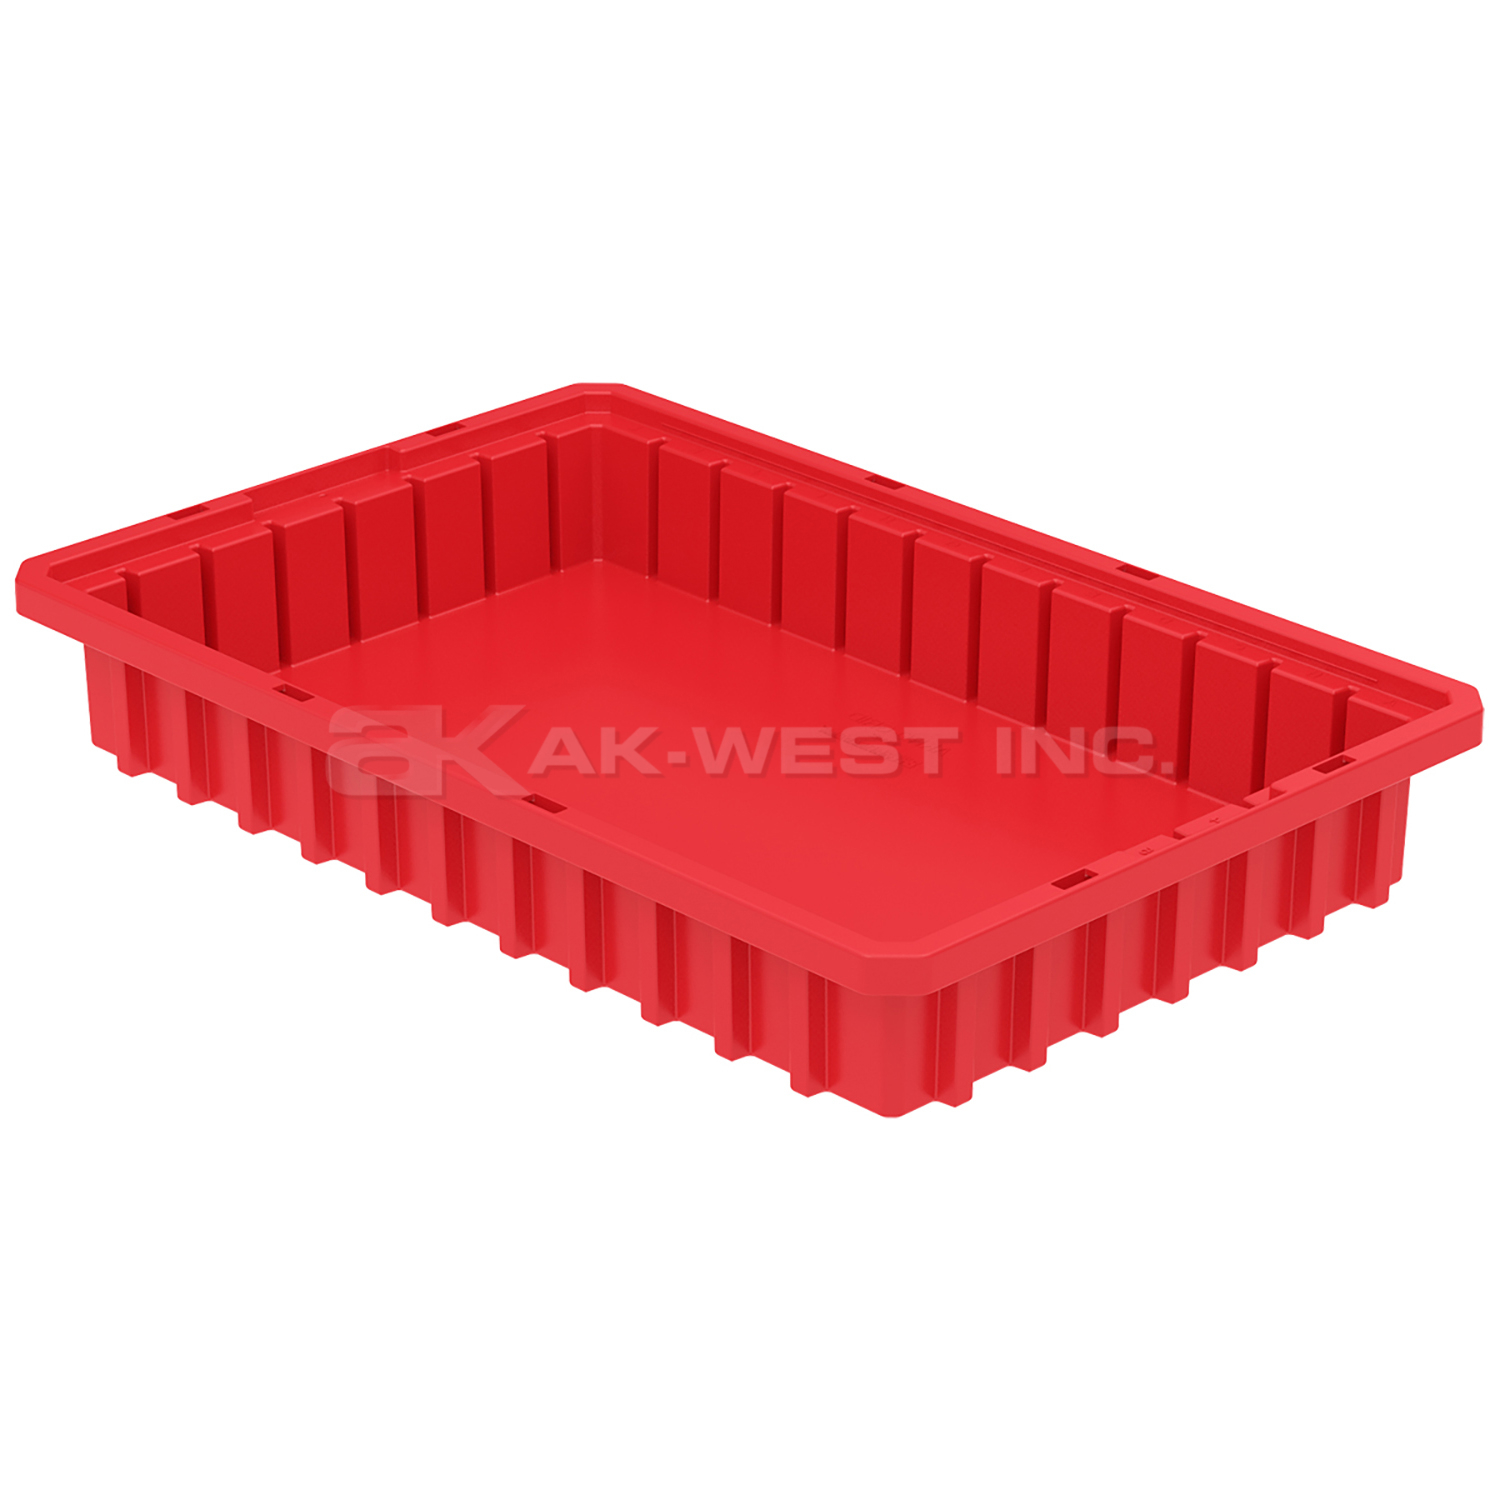 Red, 22-1/2" x 17-3/8" x 3" Dividable Grid Container (6 Per Carton)